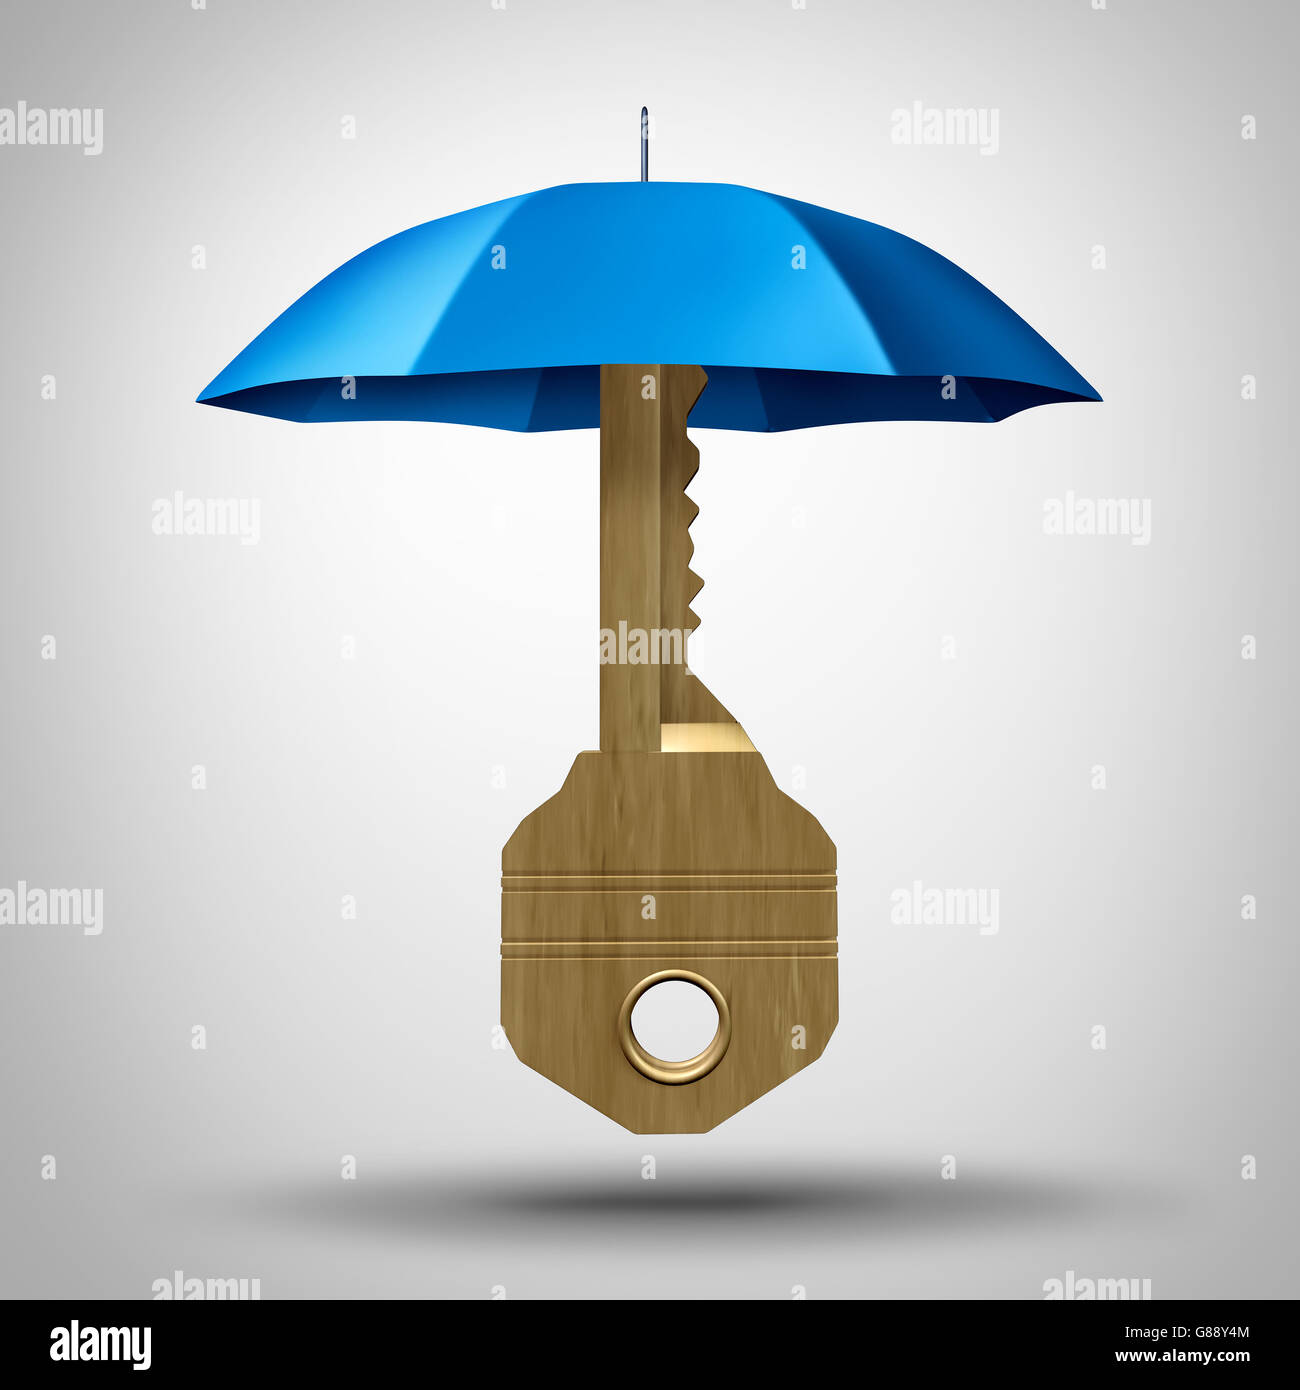 Key security concept with an umbrella protecting the symbol of solutions as an icon for defending against business strategy risk as a 3D illustration. Stock Photo